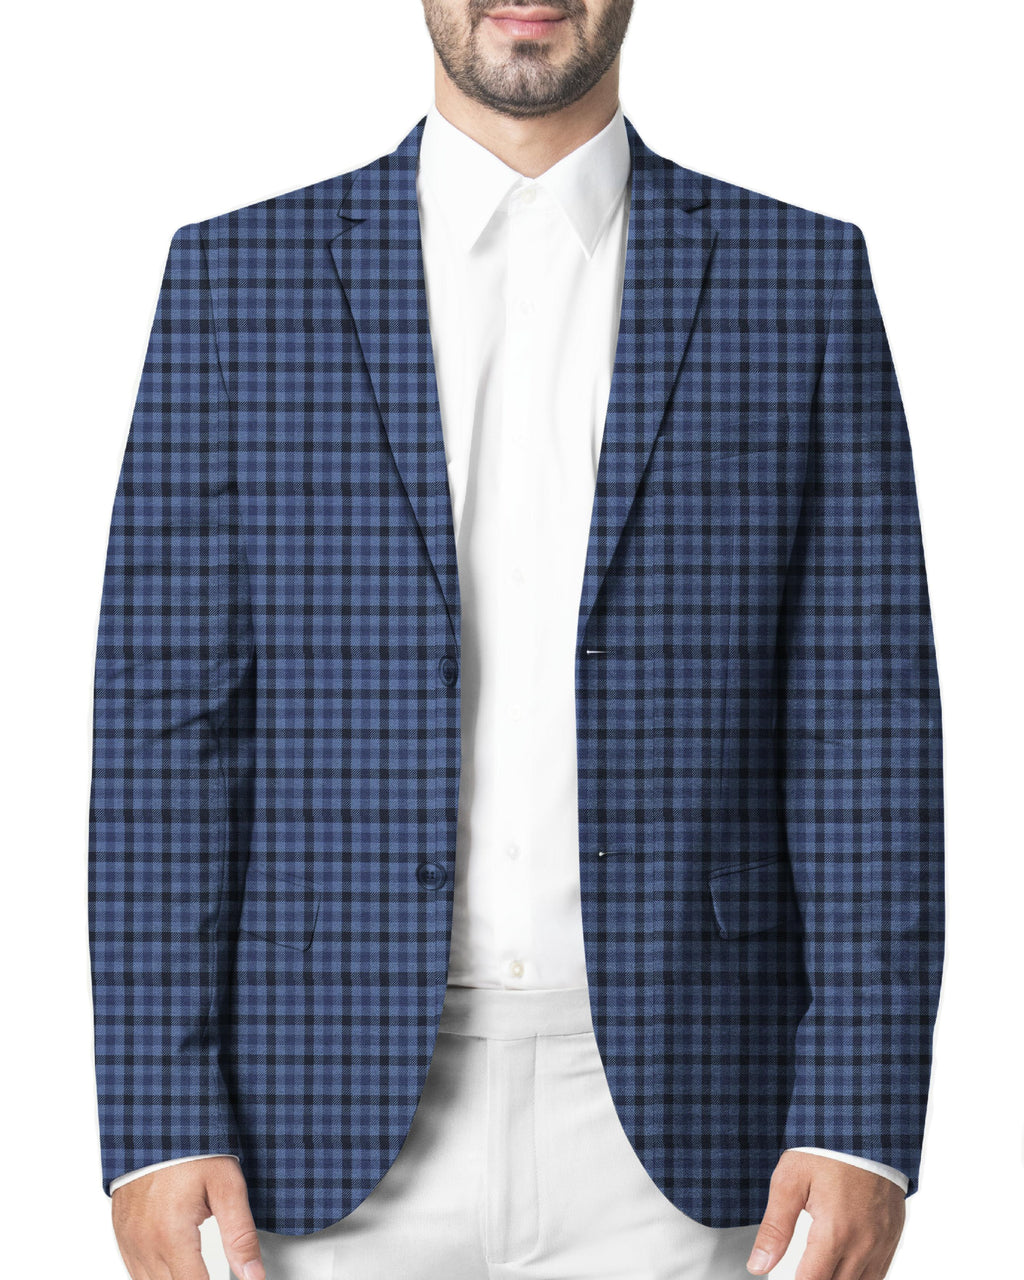 3 Shades of Blue Unite Checkered Suit - III